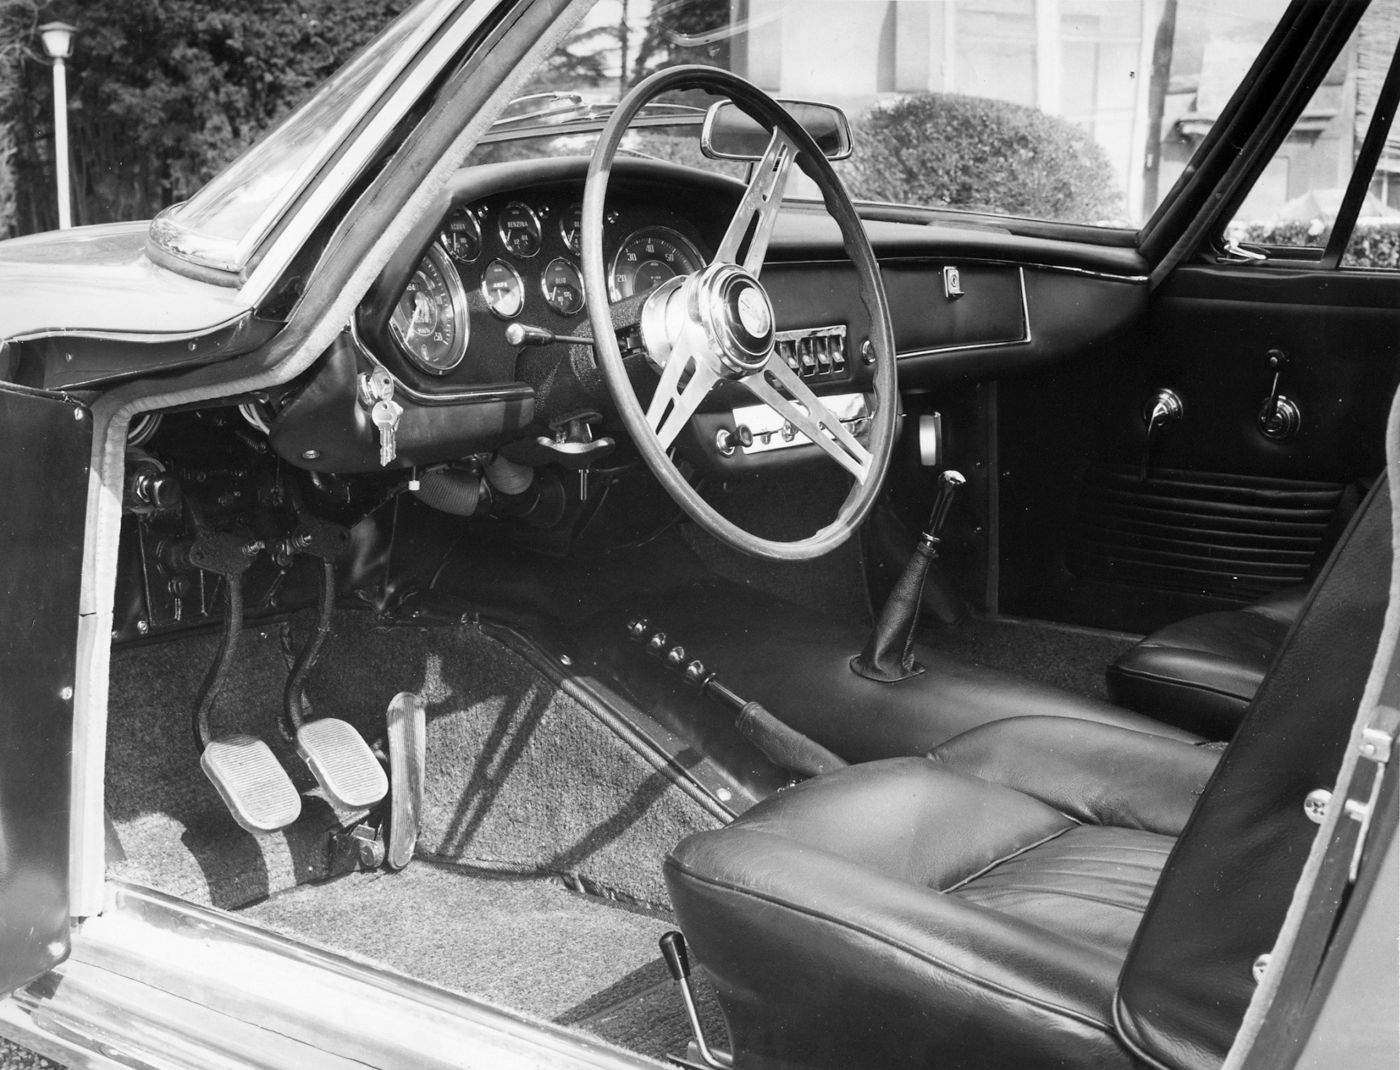 1964 Maserati Mistral Spyder - interior view of the classic sports car model